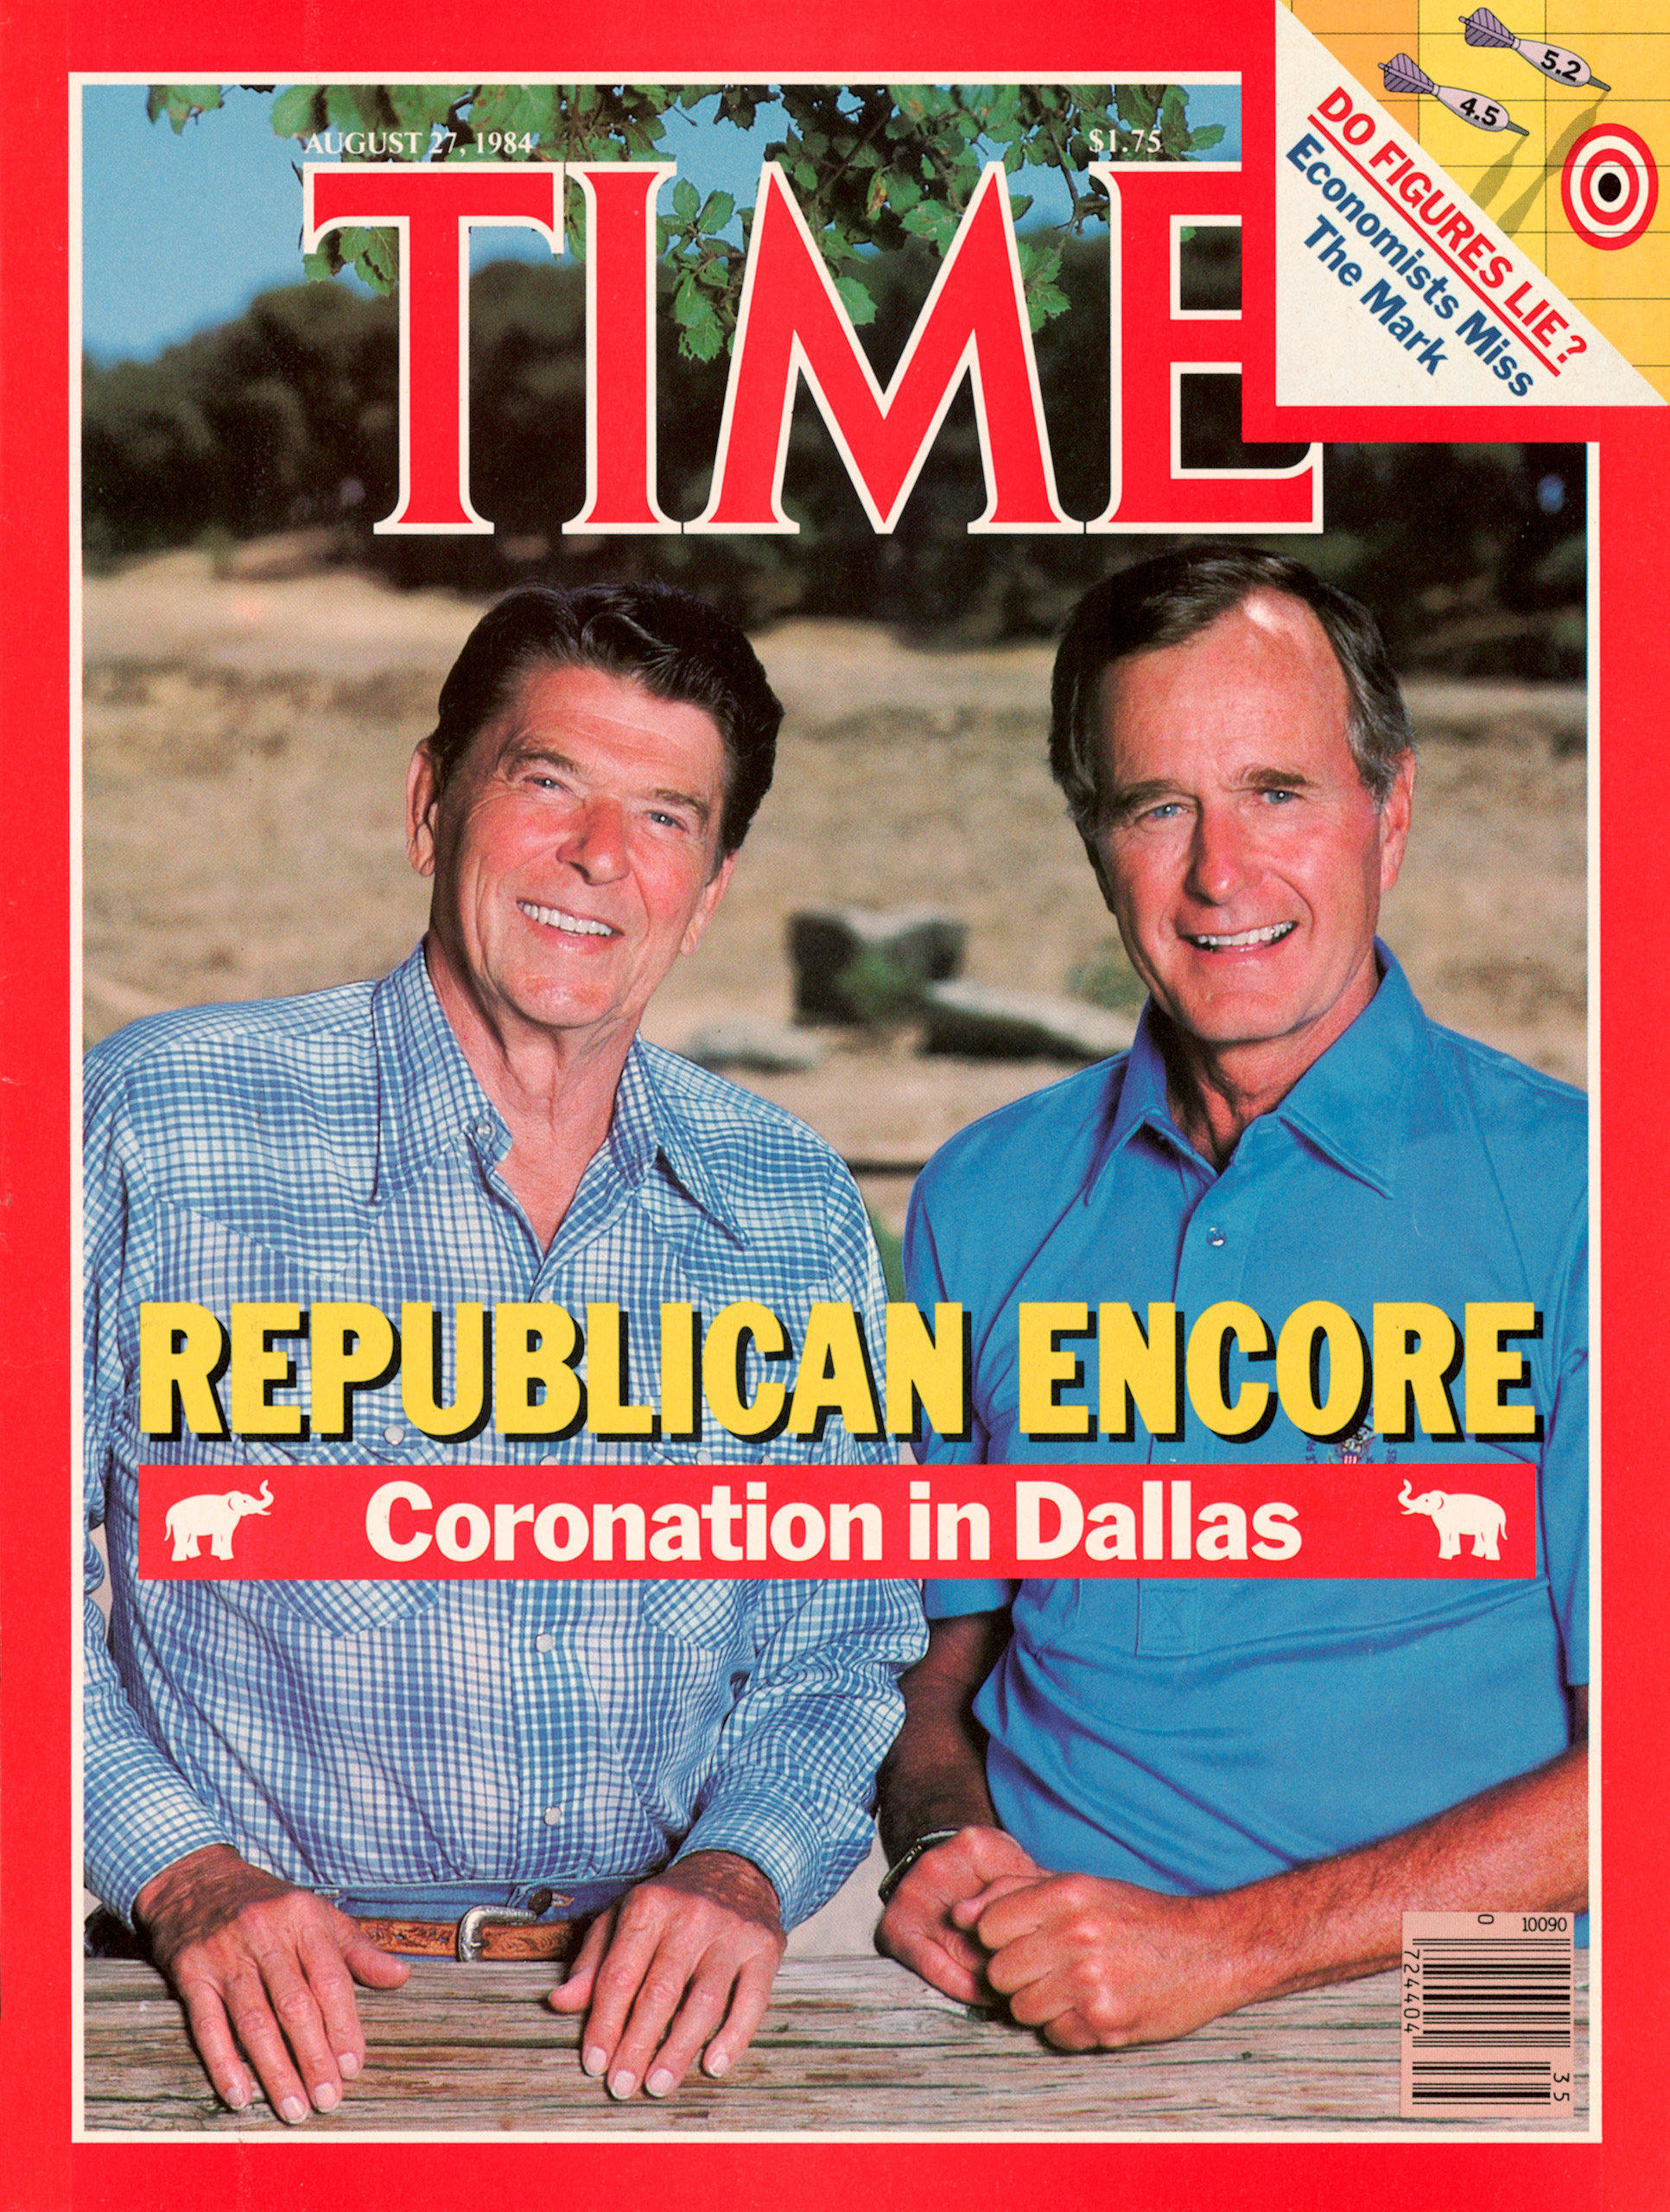 Ronald Reagan &amp; George H.W. Bush on the Aug. 27, 1984, cover of TIME. Cover photo by Dirck Halstead.